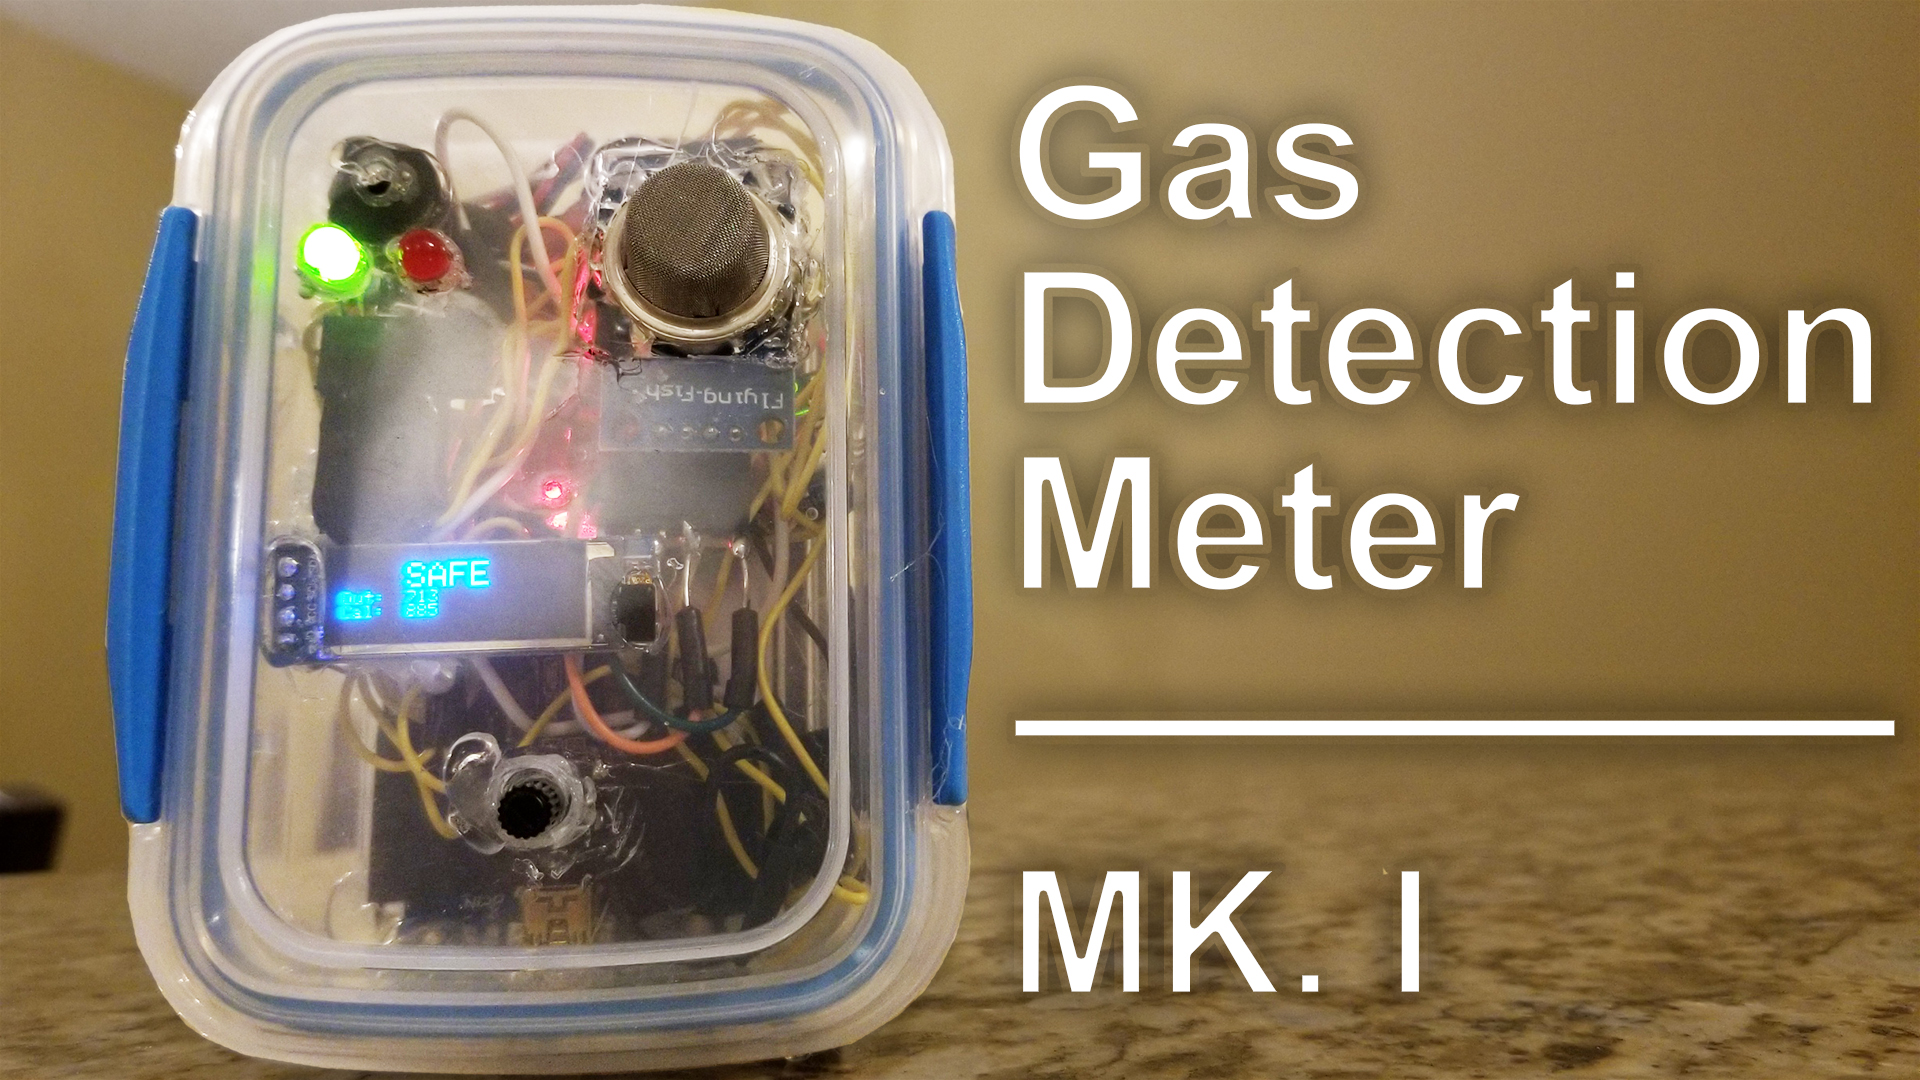 Arduino Gas Detection Meter Project - Mark I